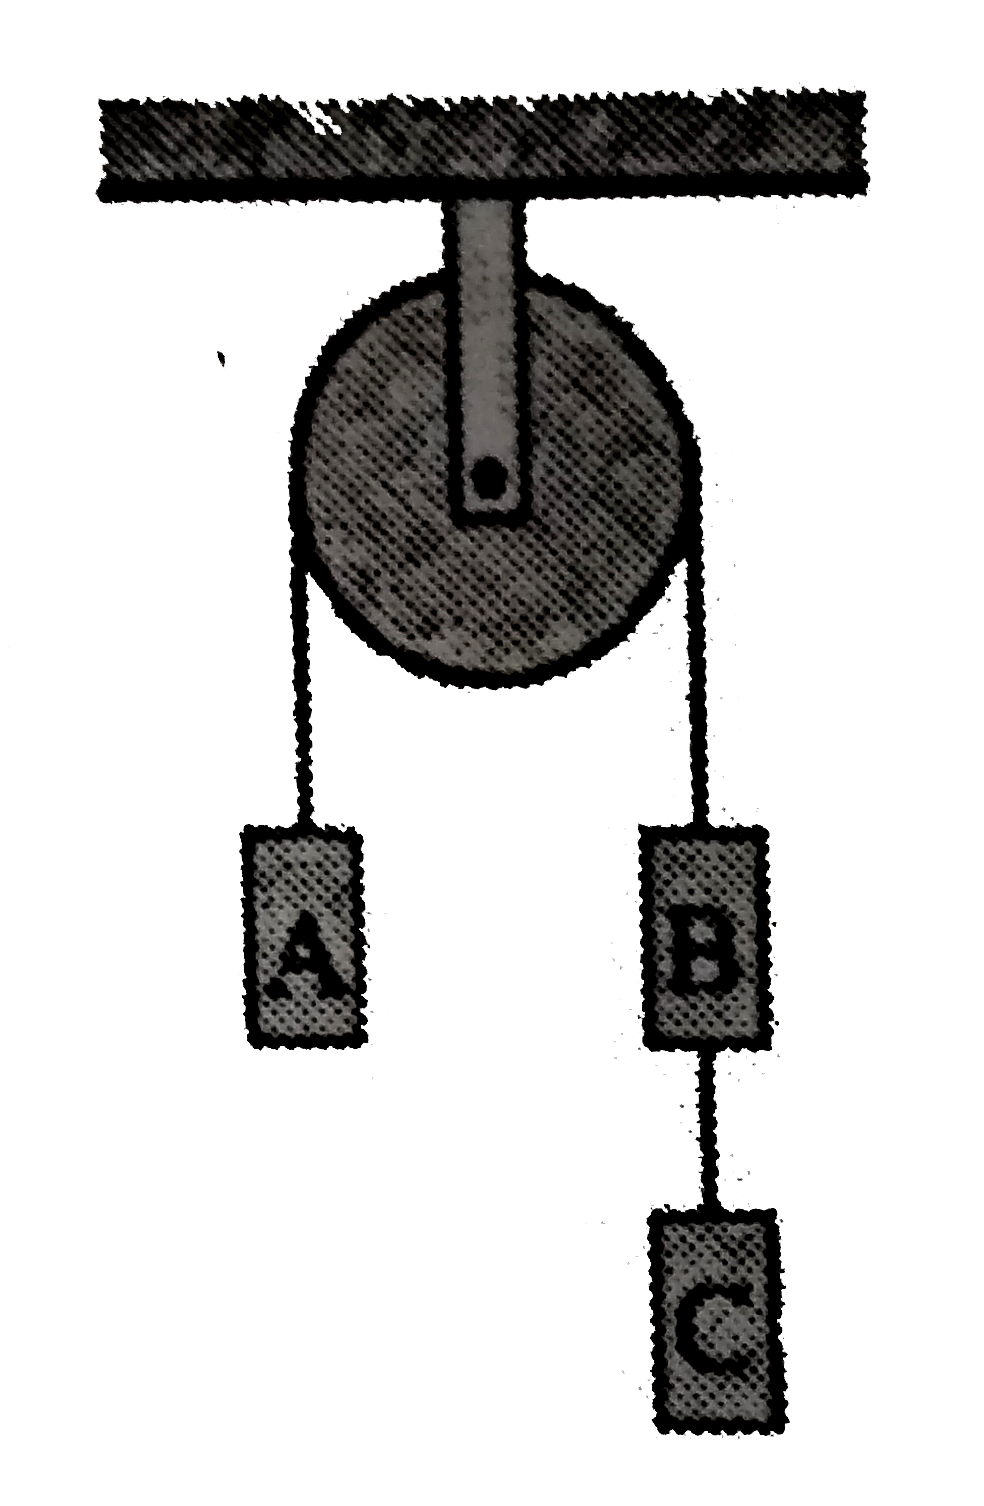 In the system shown, the blocks A,B and C are of weight 4W, W and W respectively. The system set free. The tension in the string connecting the blocks B and C is